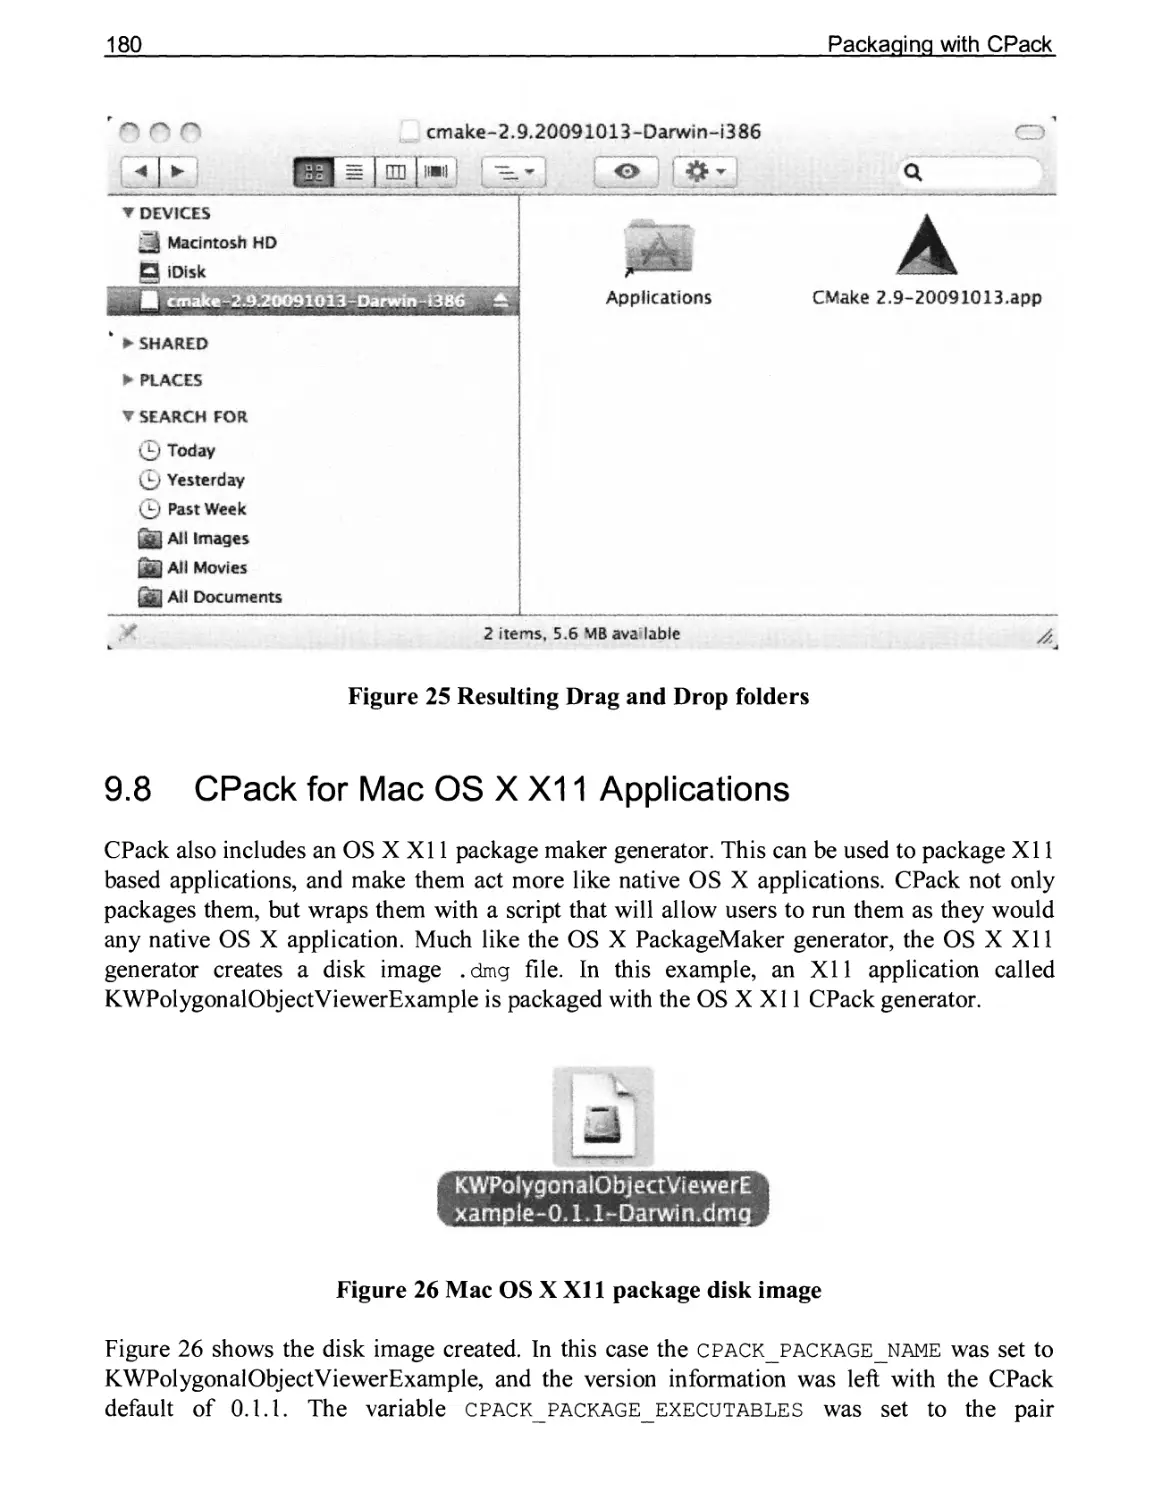 9.8 CPack for Mac OS X X11 Applications